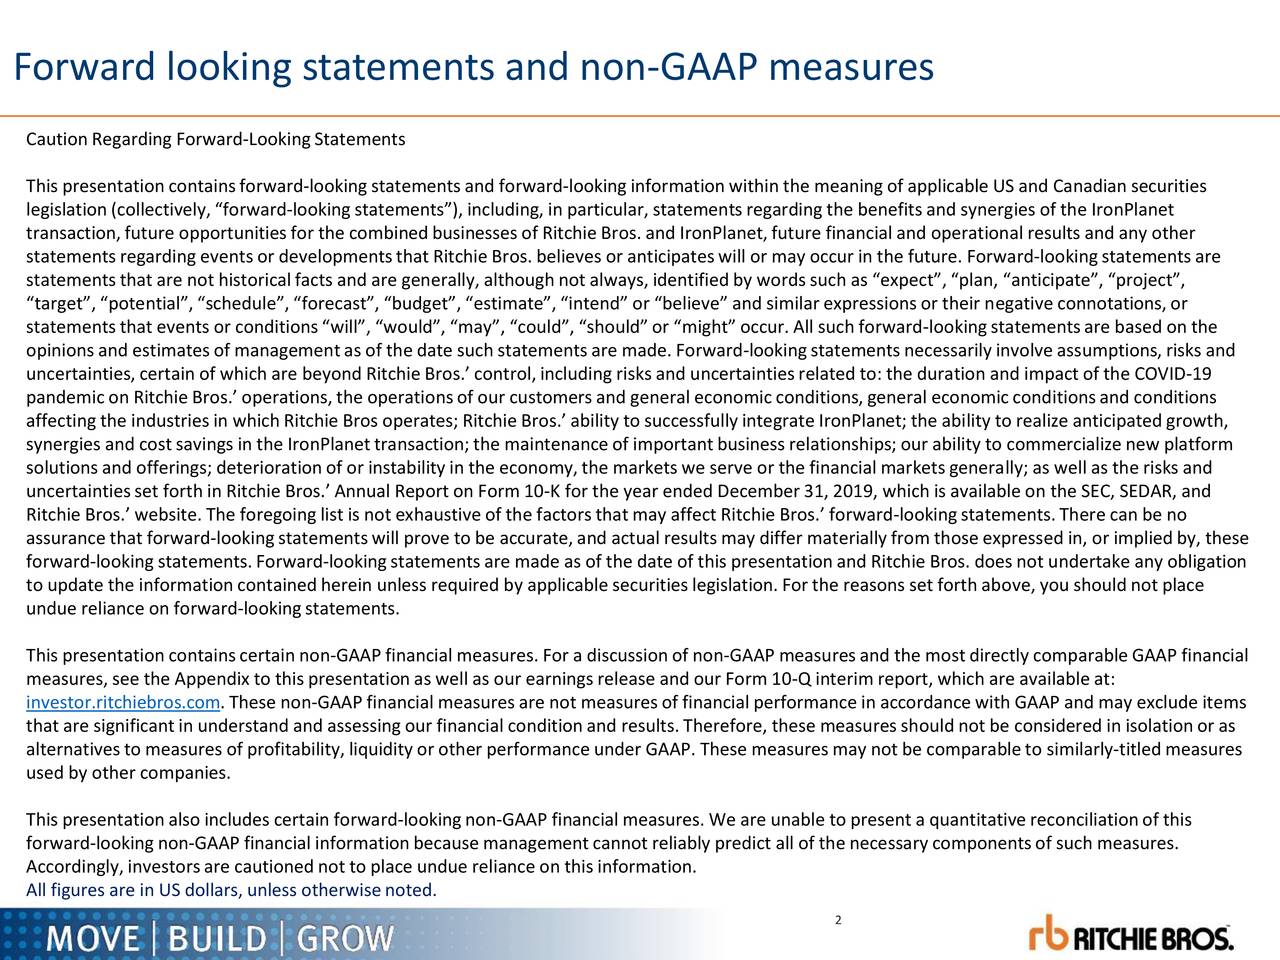 Forward looking statements and non-GAAP measures